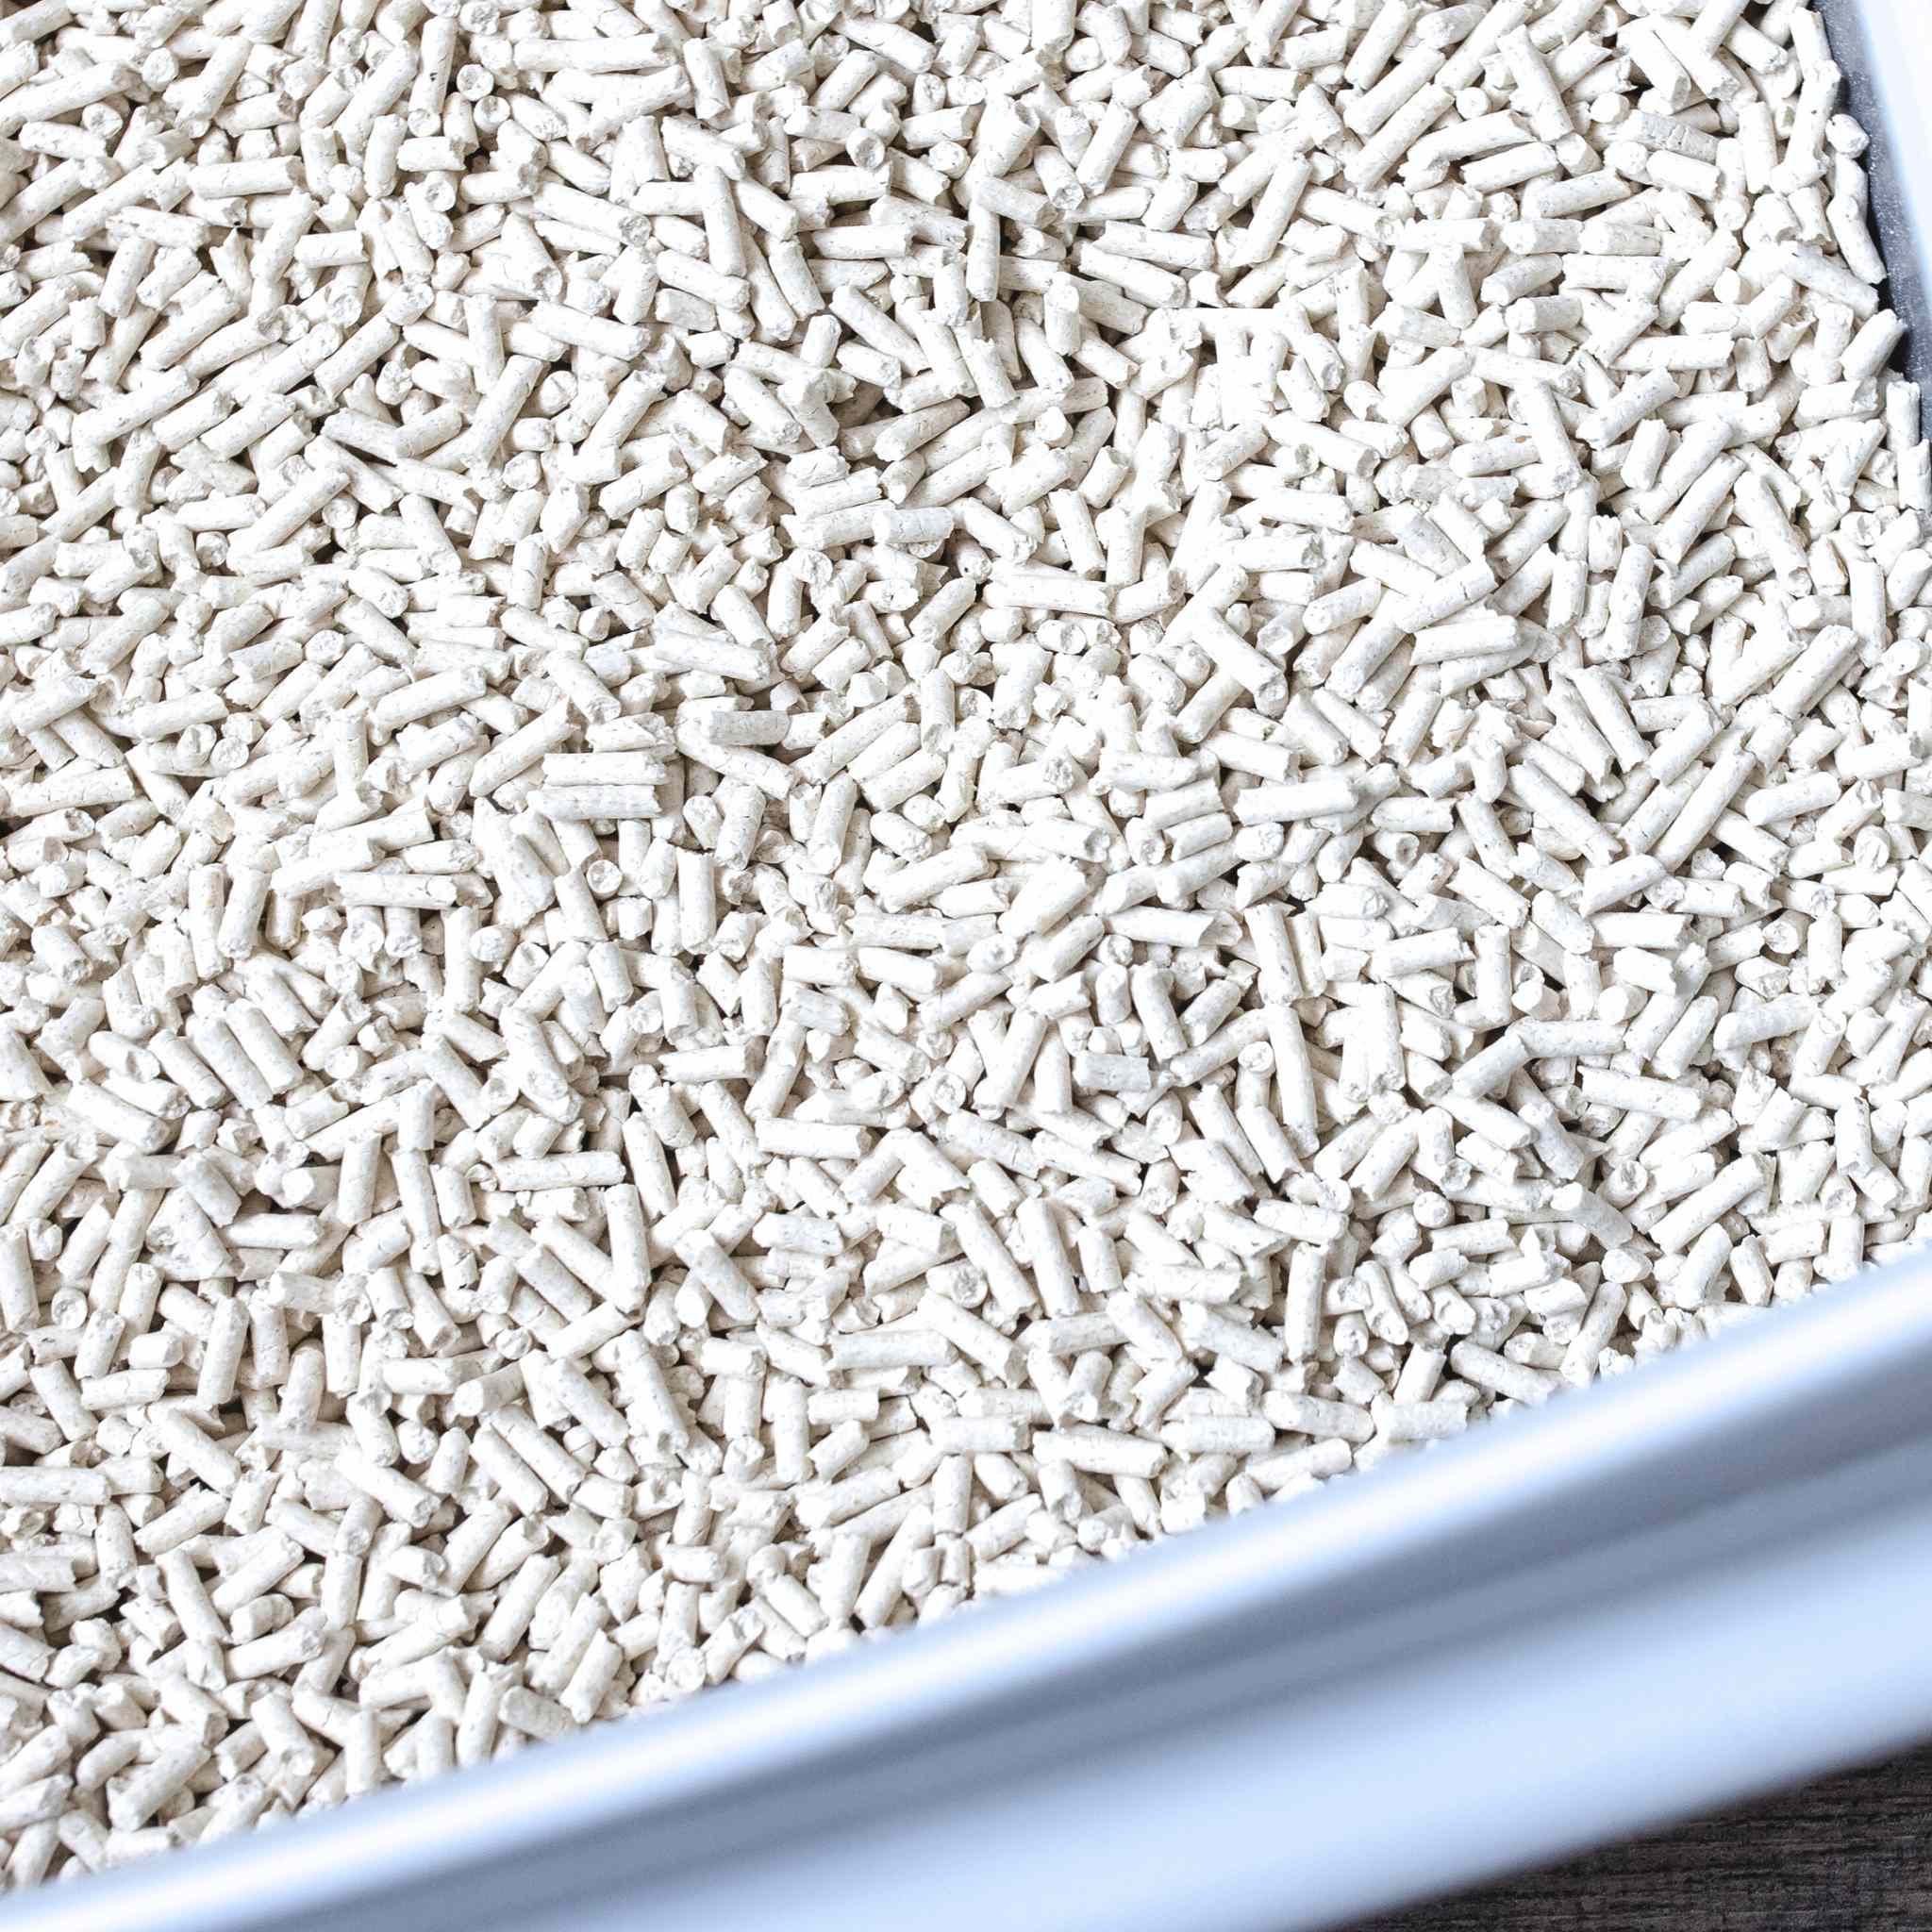 Close-up of tofu cat litter pellets in a litter box, highlighting the final eco-friendly product made from the soybeans